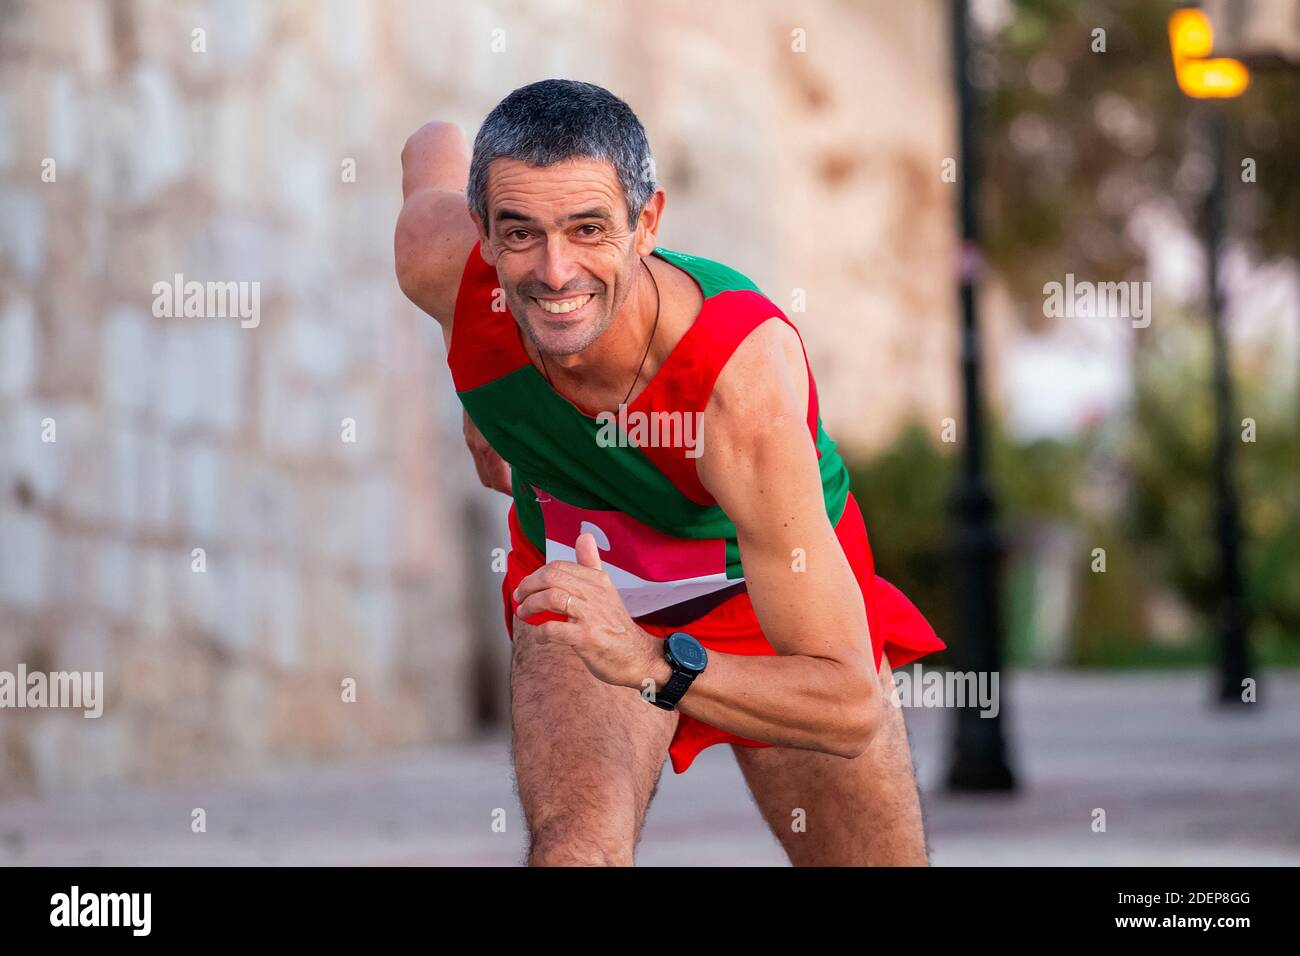 Portuguese Runner High Resolution Stock Photography and Images - Alamy